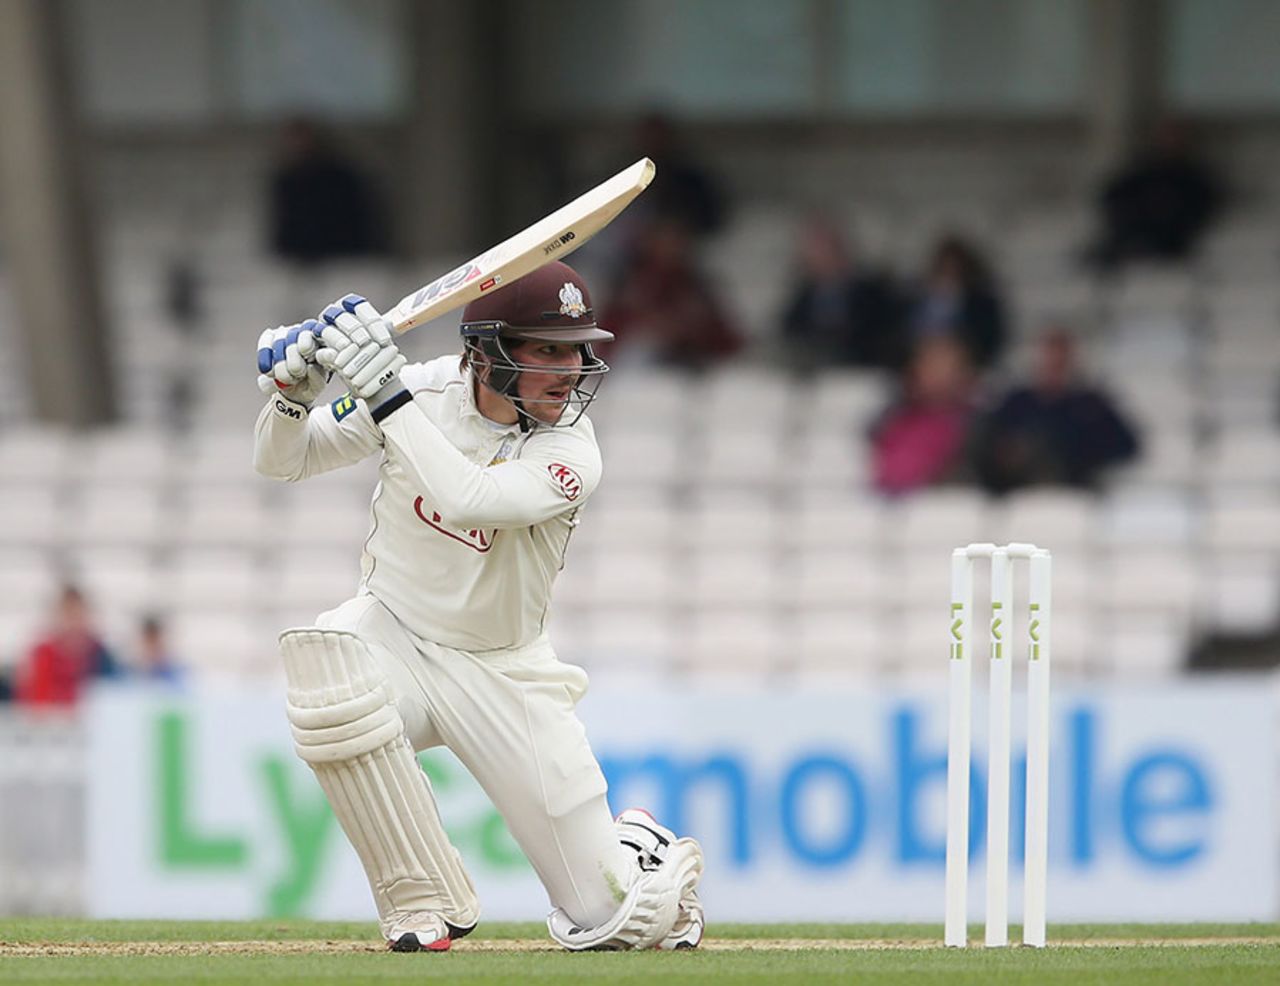 Rory Burns carves through the off side, Surrey v Essex, County Championship Division Two, The Oval, 1st day, April 26, 2015